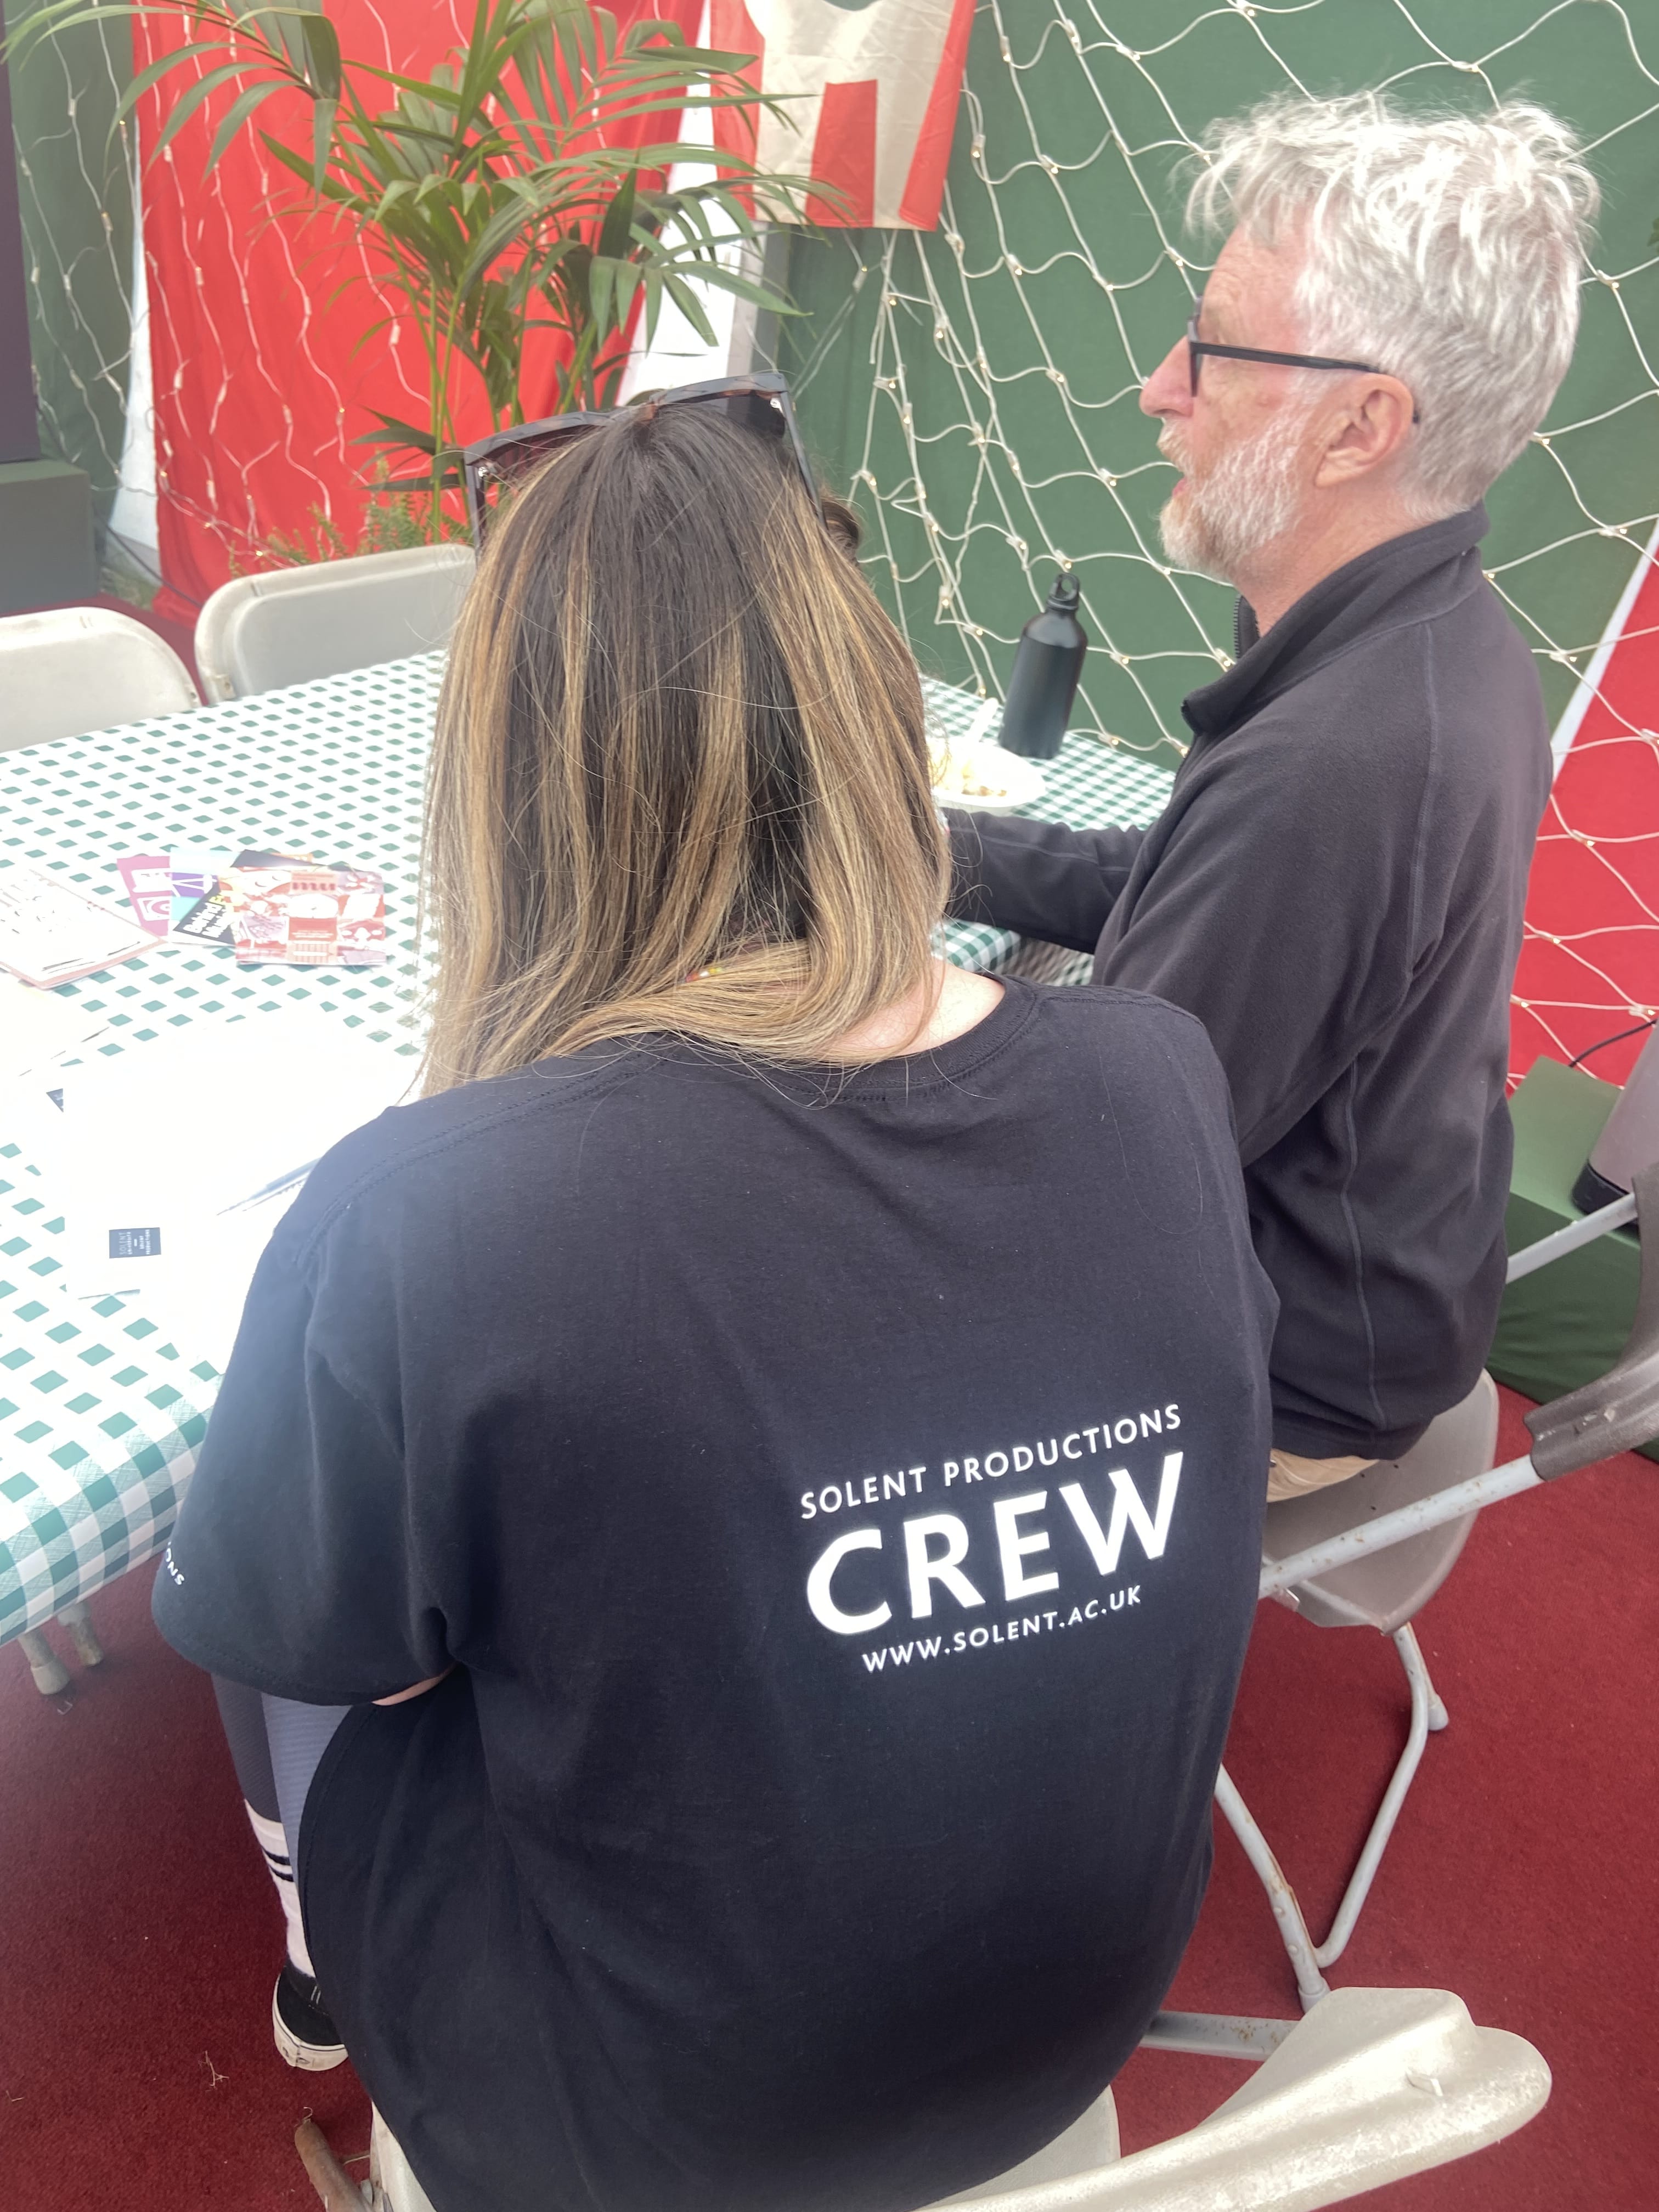 Image of Solent University students working as crew at Glastonbury Festival